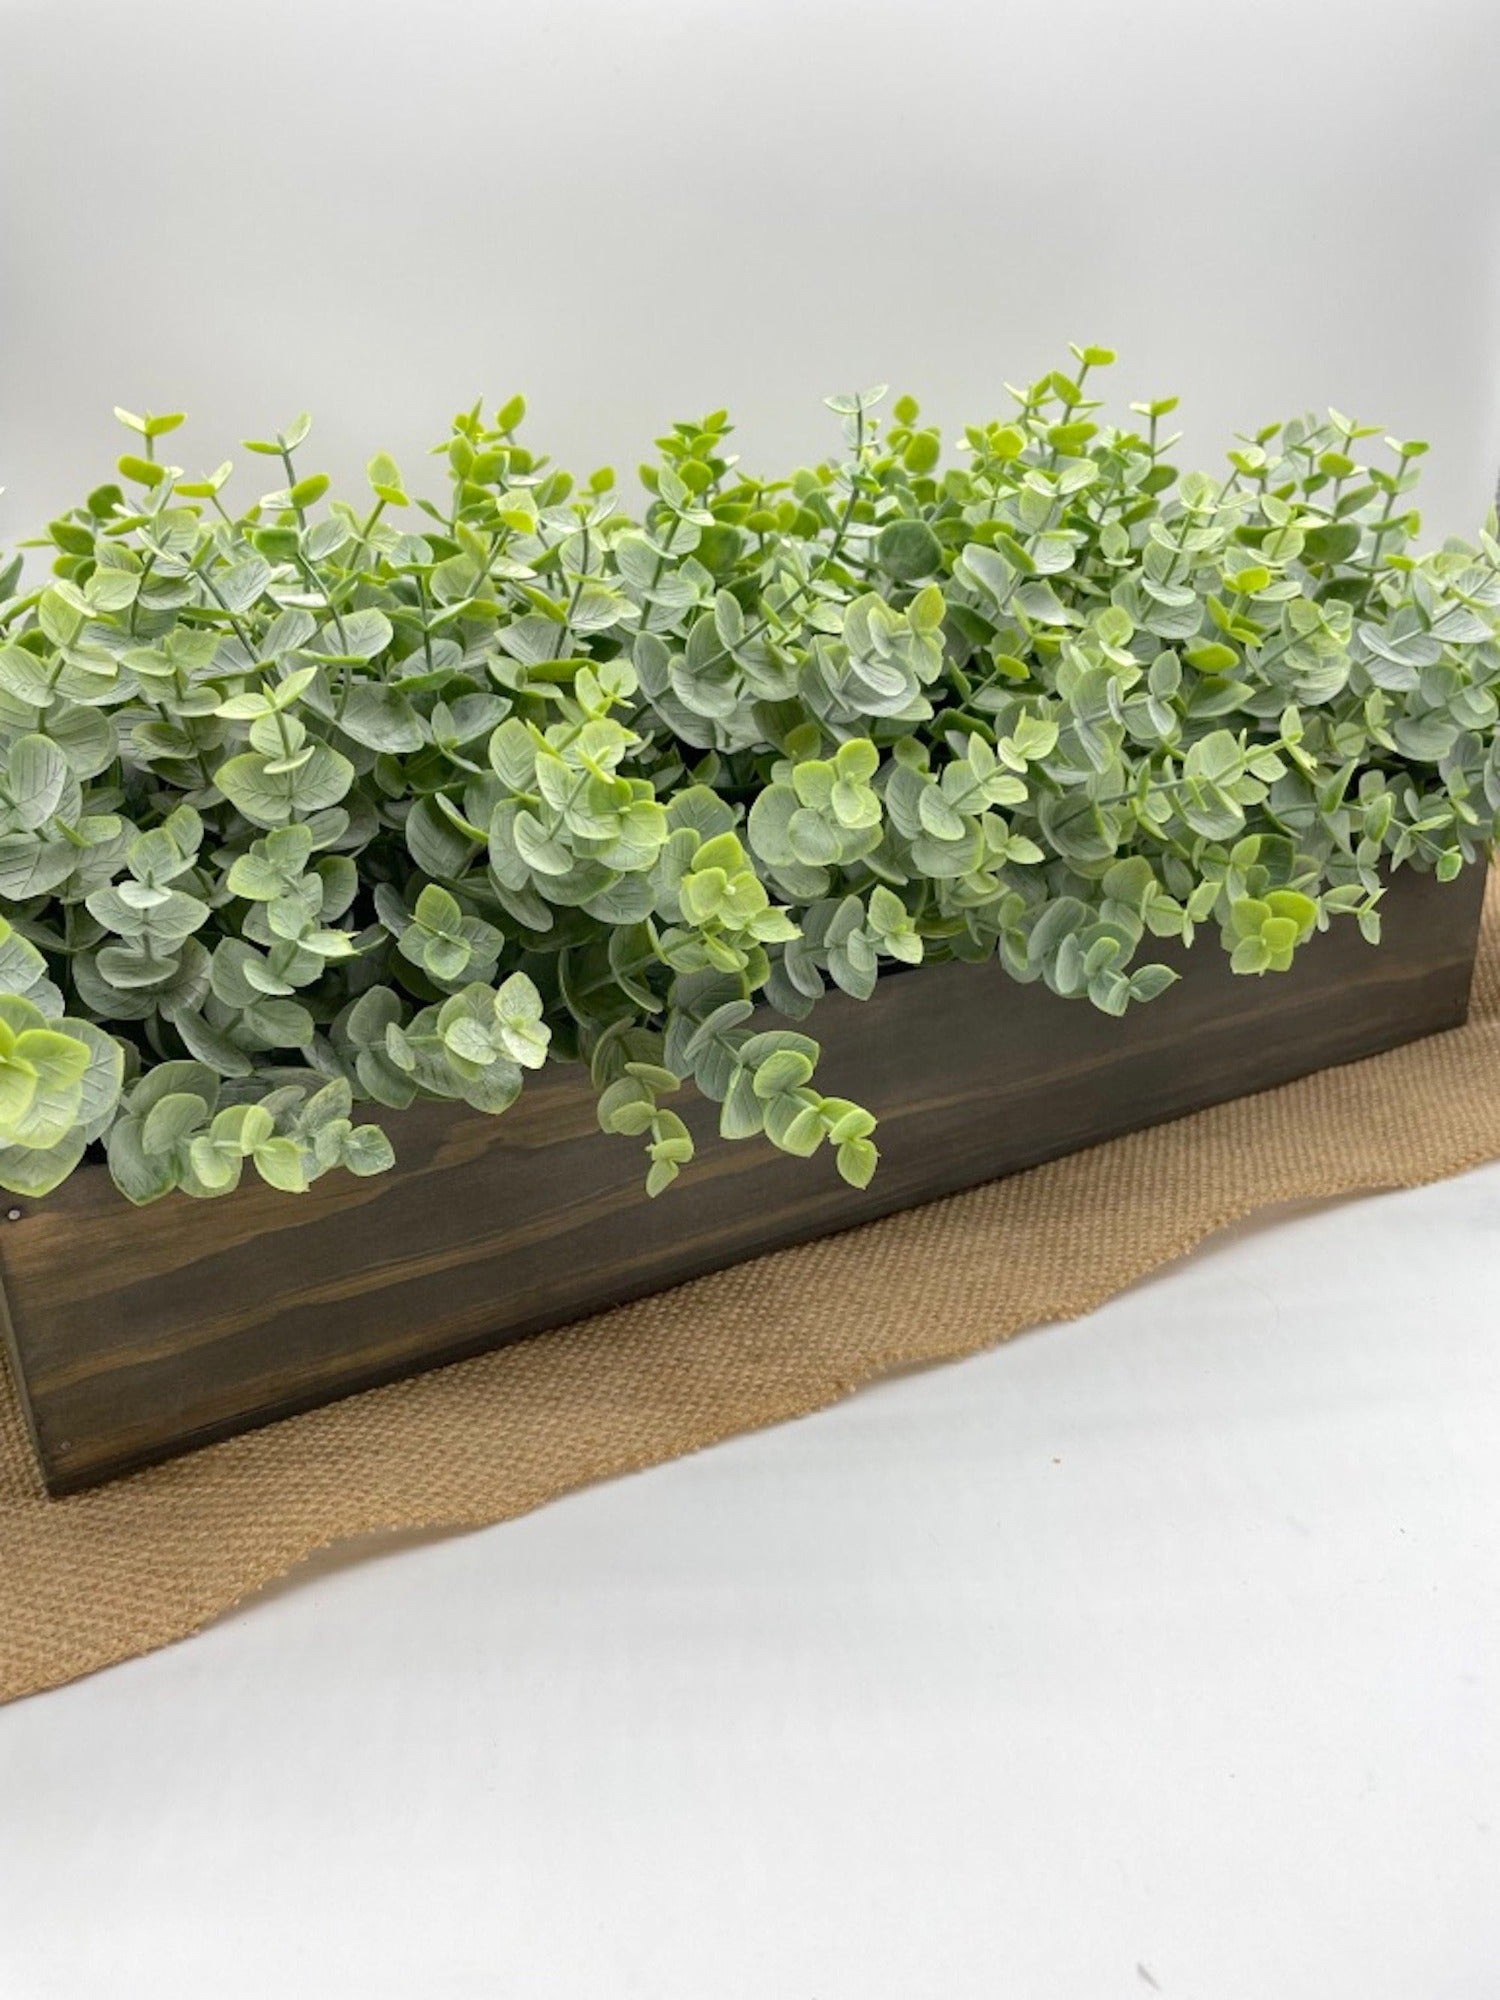 Eucalyptus Centerpiece for Dining Table, Silk Plants in Rustic Barnwood Planter for Mantel